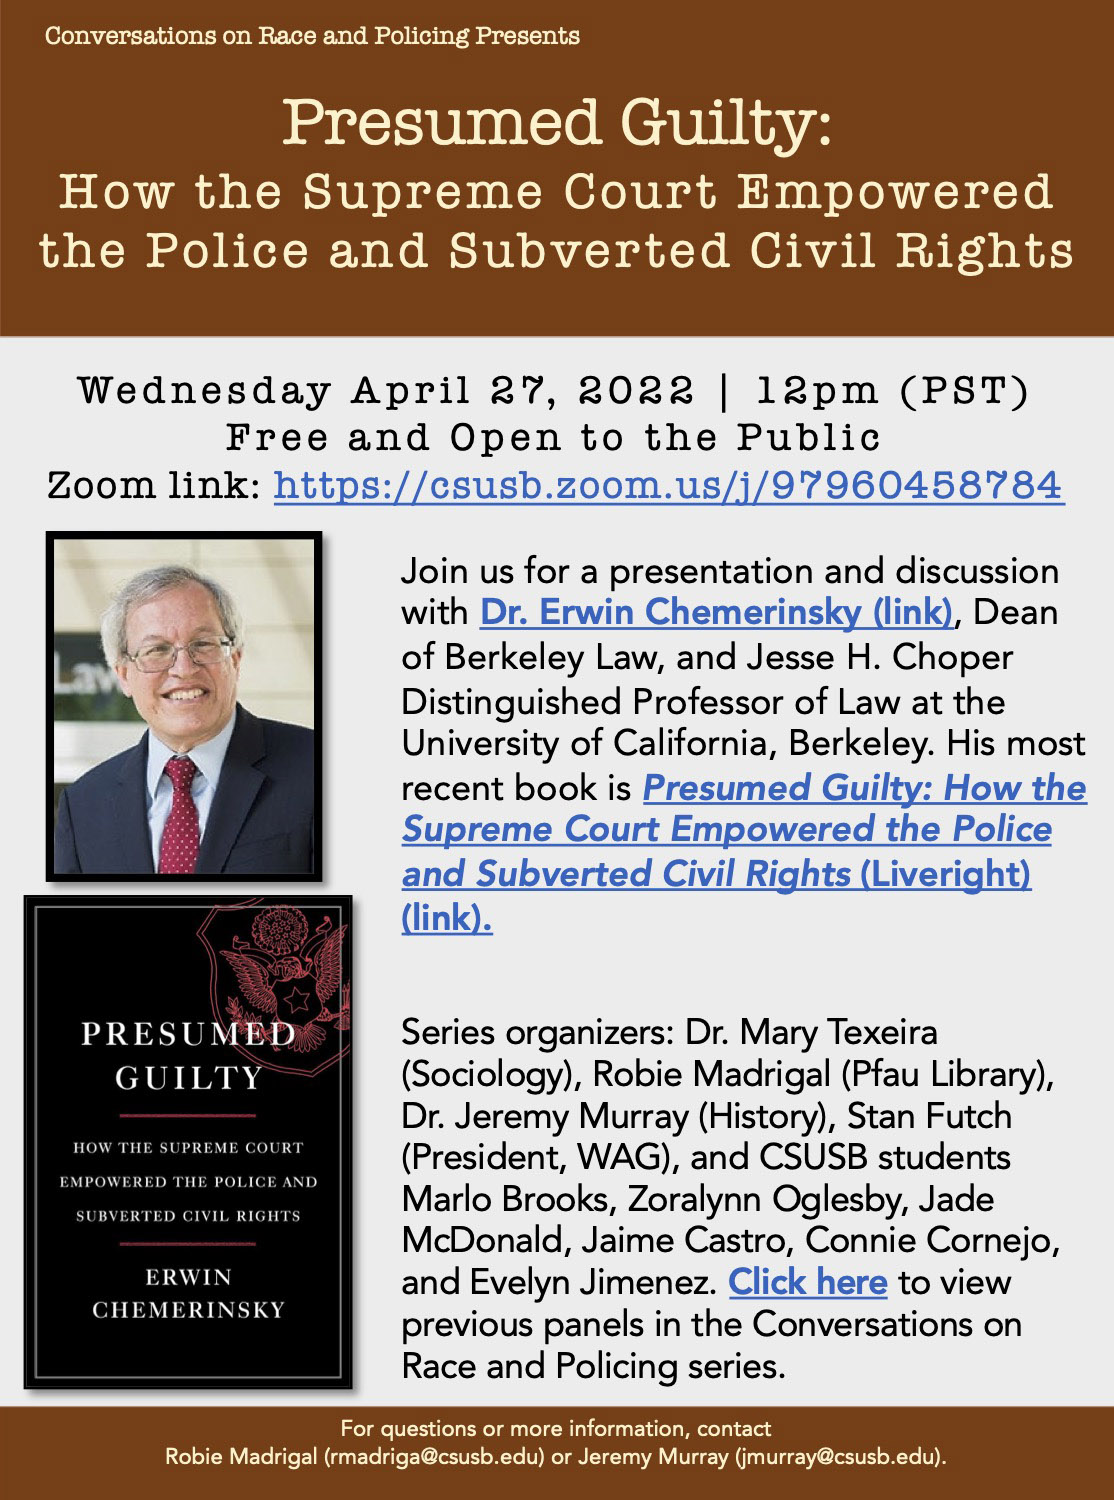 Conversations on Race and Policing April 27 event flyer.